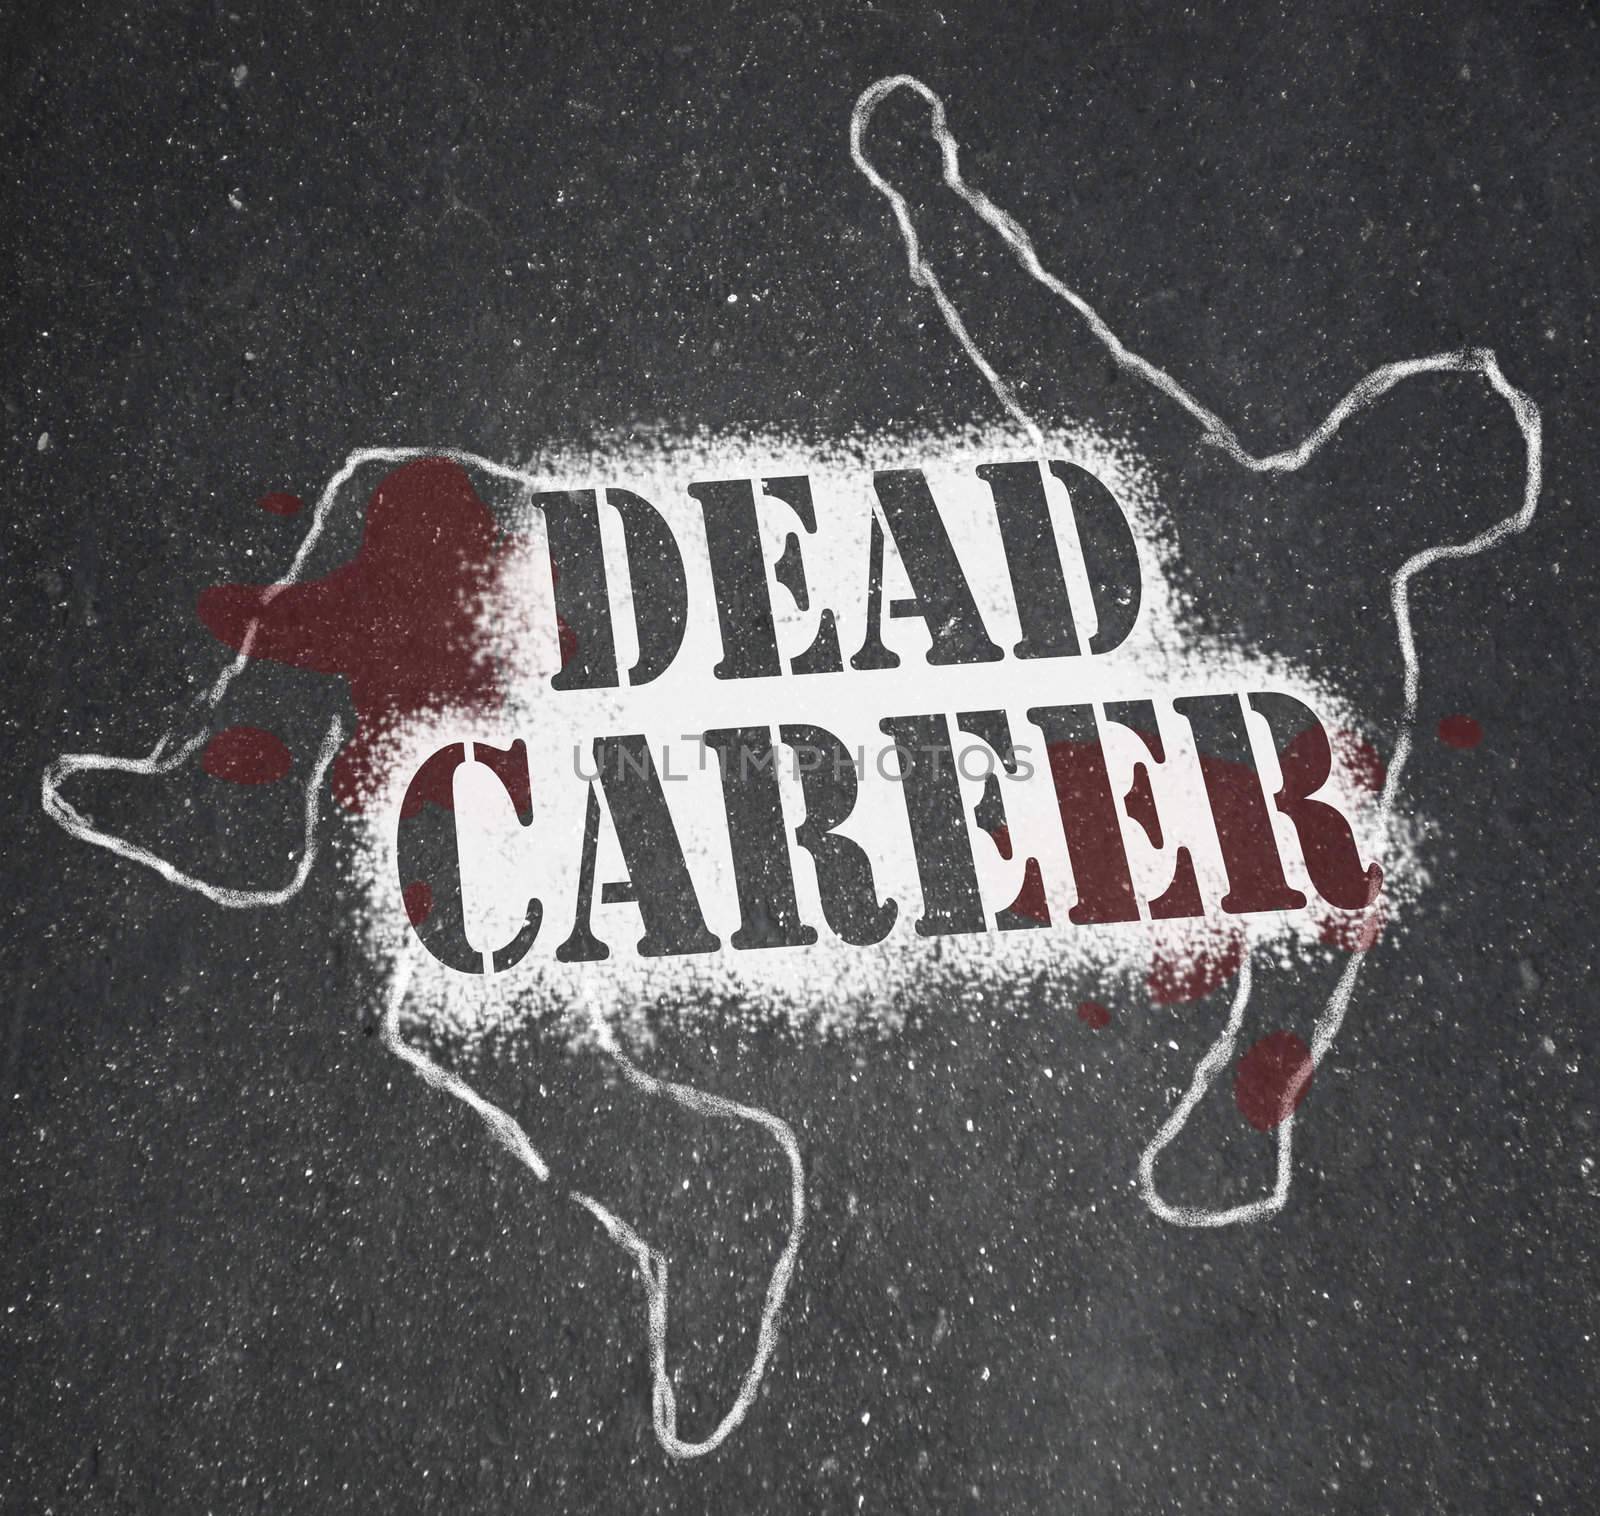 A chalk outline of a dead body symbolizing a career that has stalled due to being obsolete, demoted or obsolete